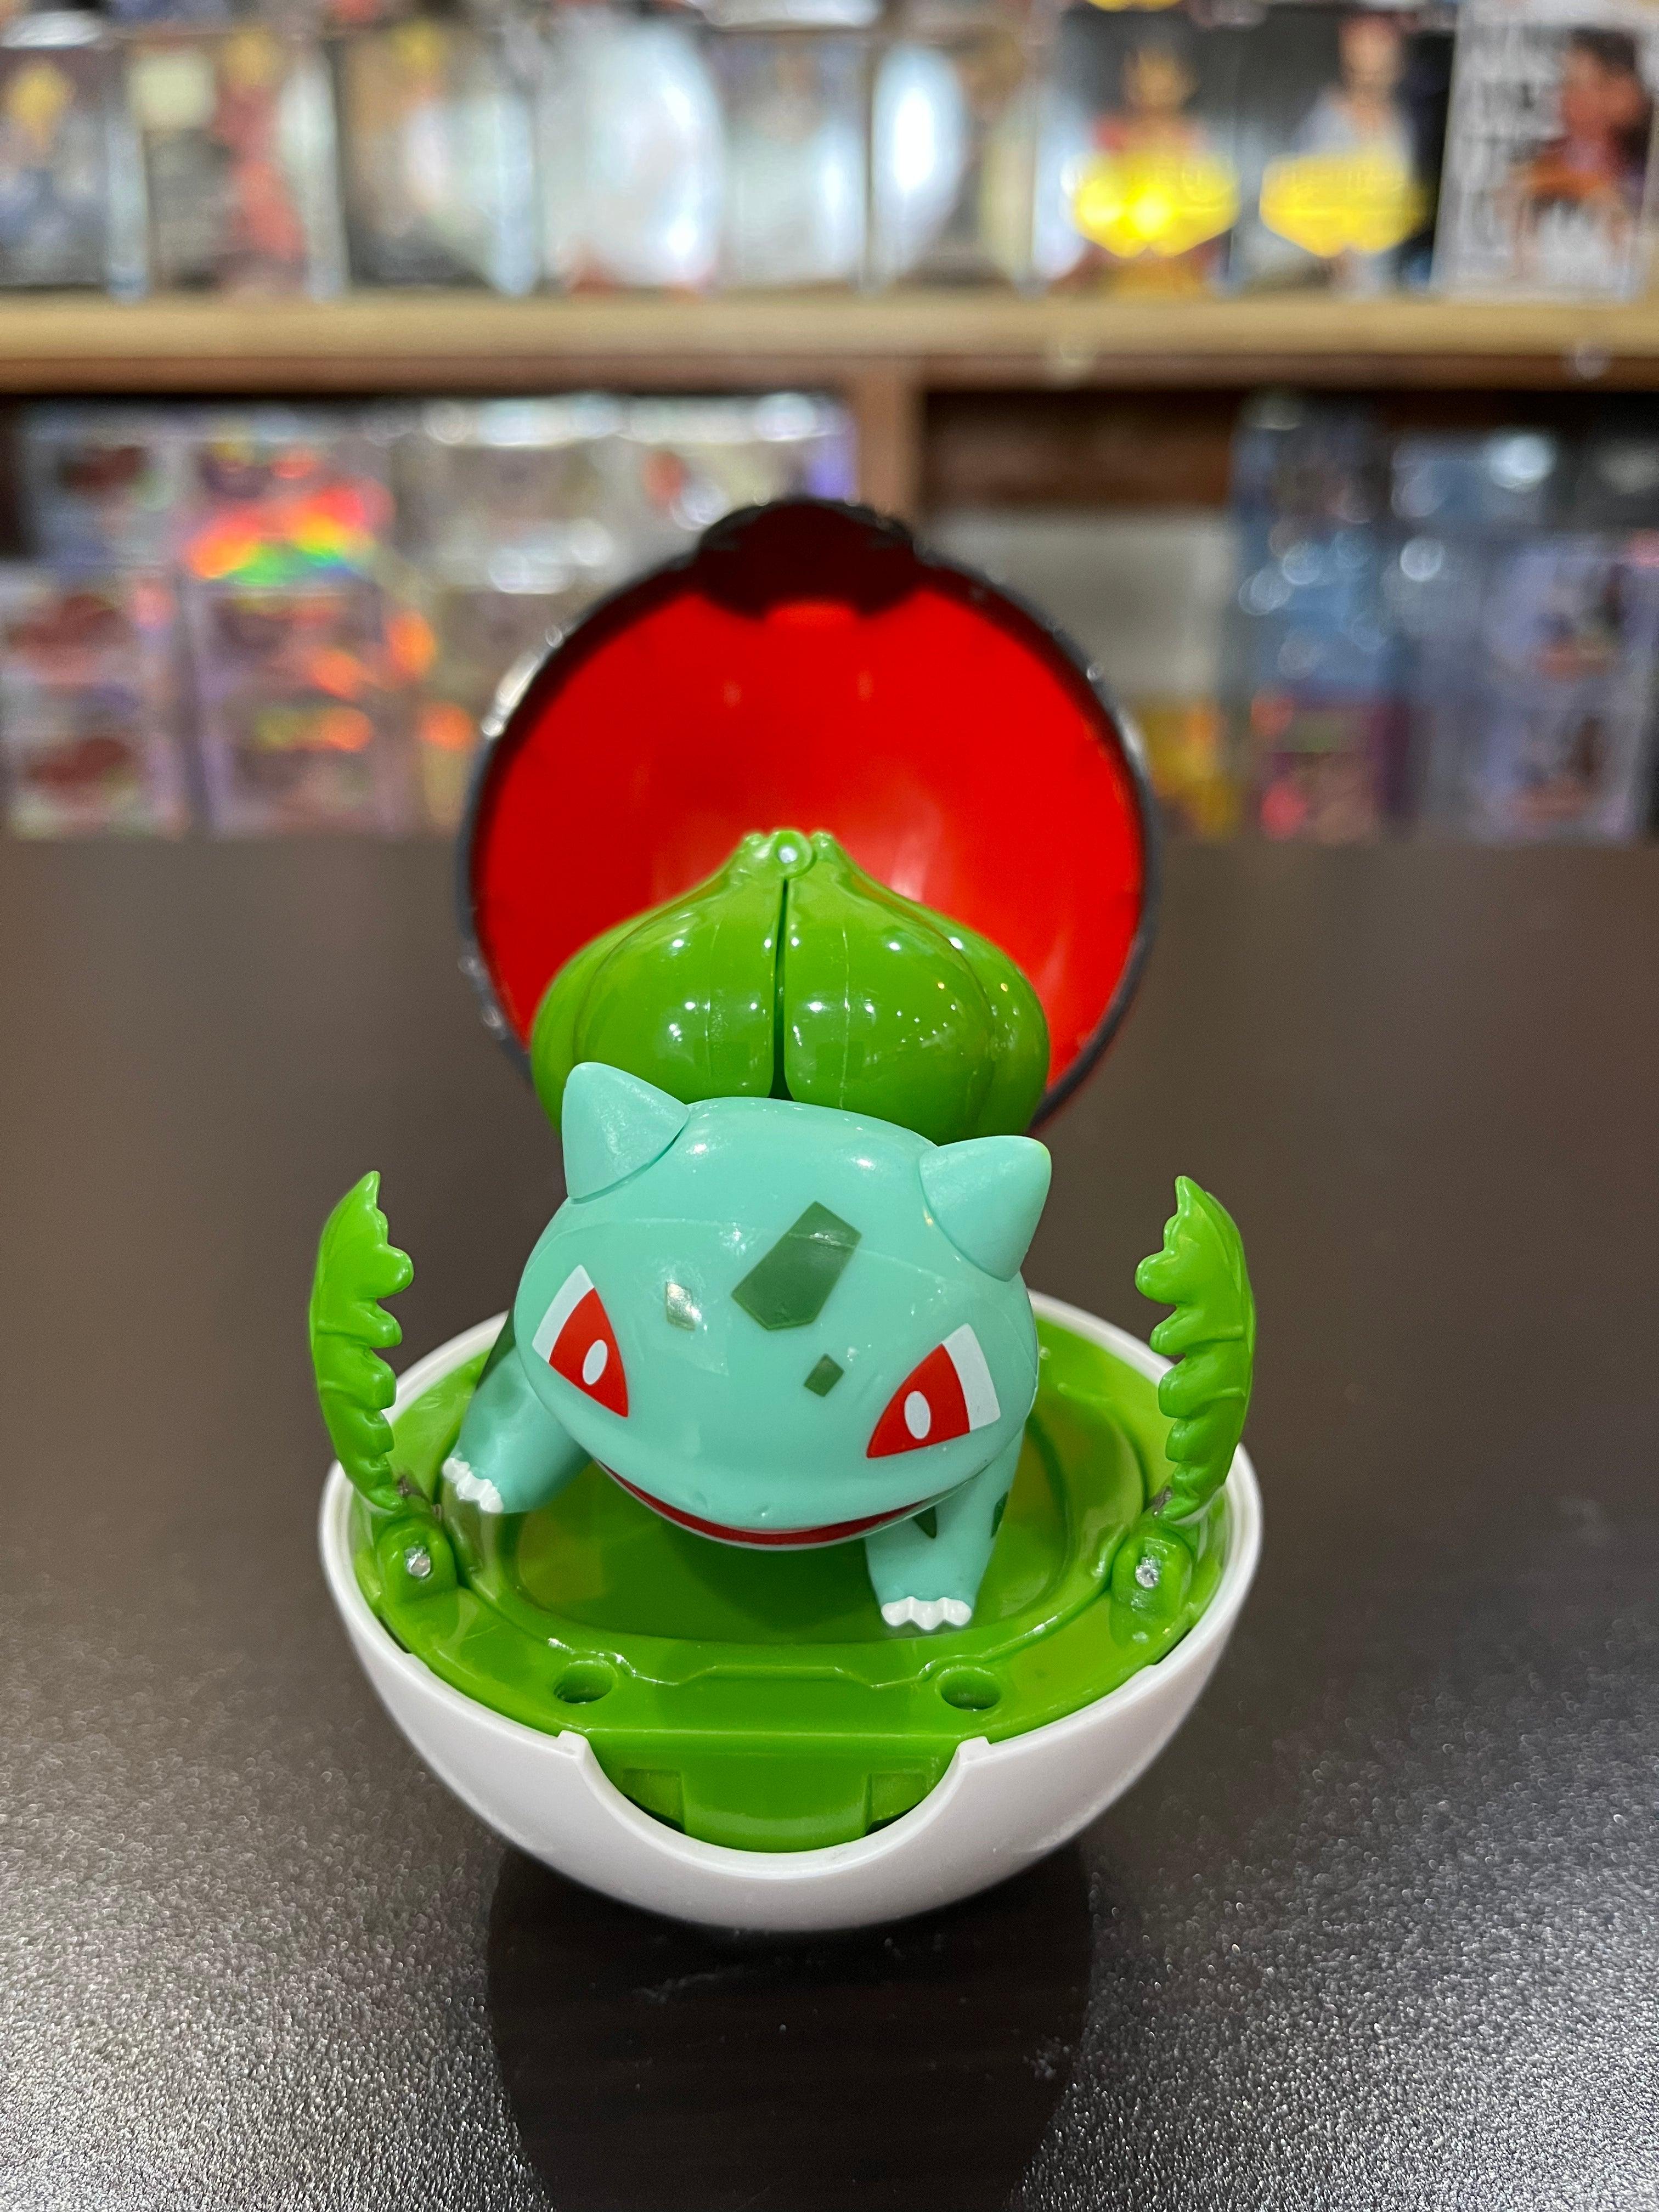 Anime Toy Squirtle & Bulbasaur Skiing Version Light Up PVC Figure  Decoration | eBay